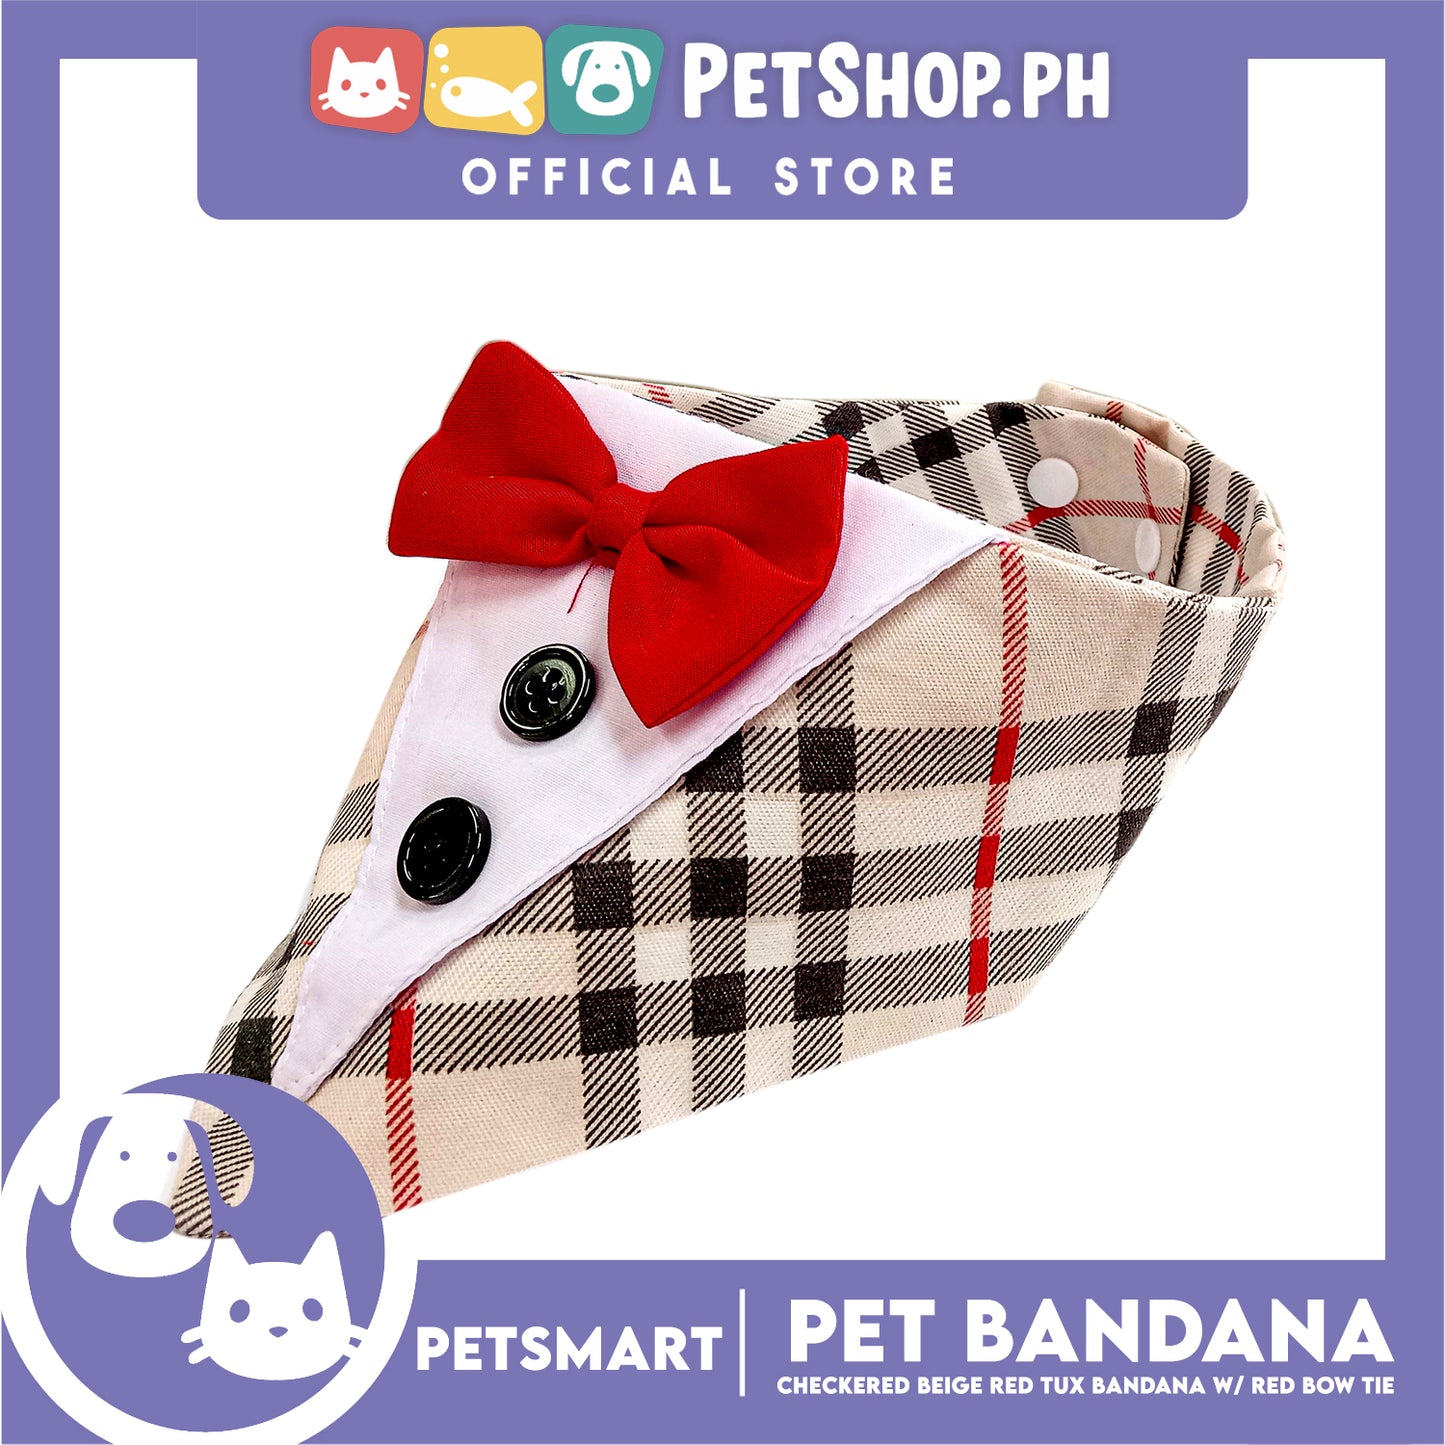 Pet Bandana Checkered Beige Red Tuxedo Bandana with Red Bow Tie Design (Large) Perfect Fit for Dogs and Cats